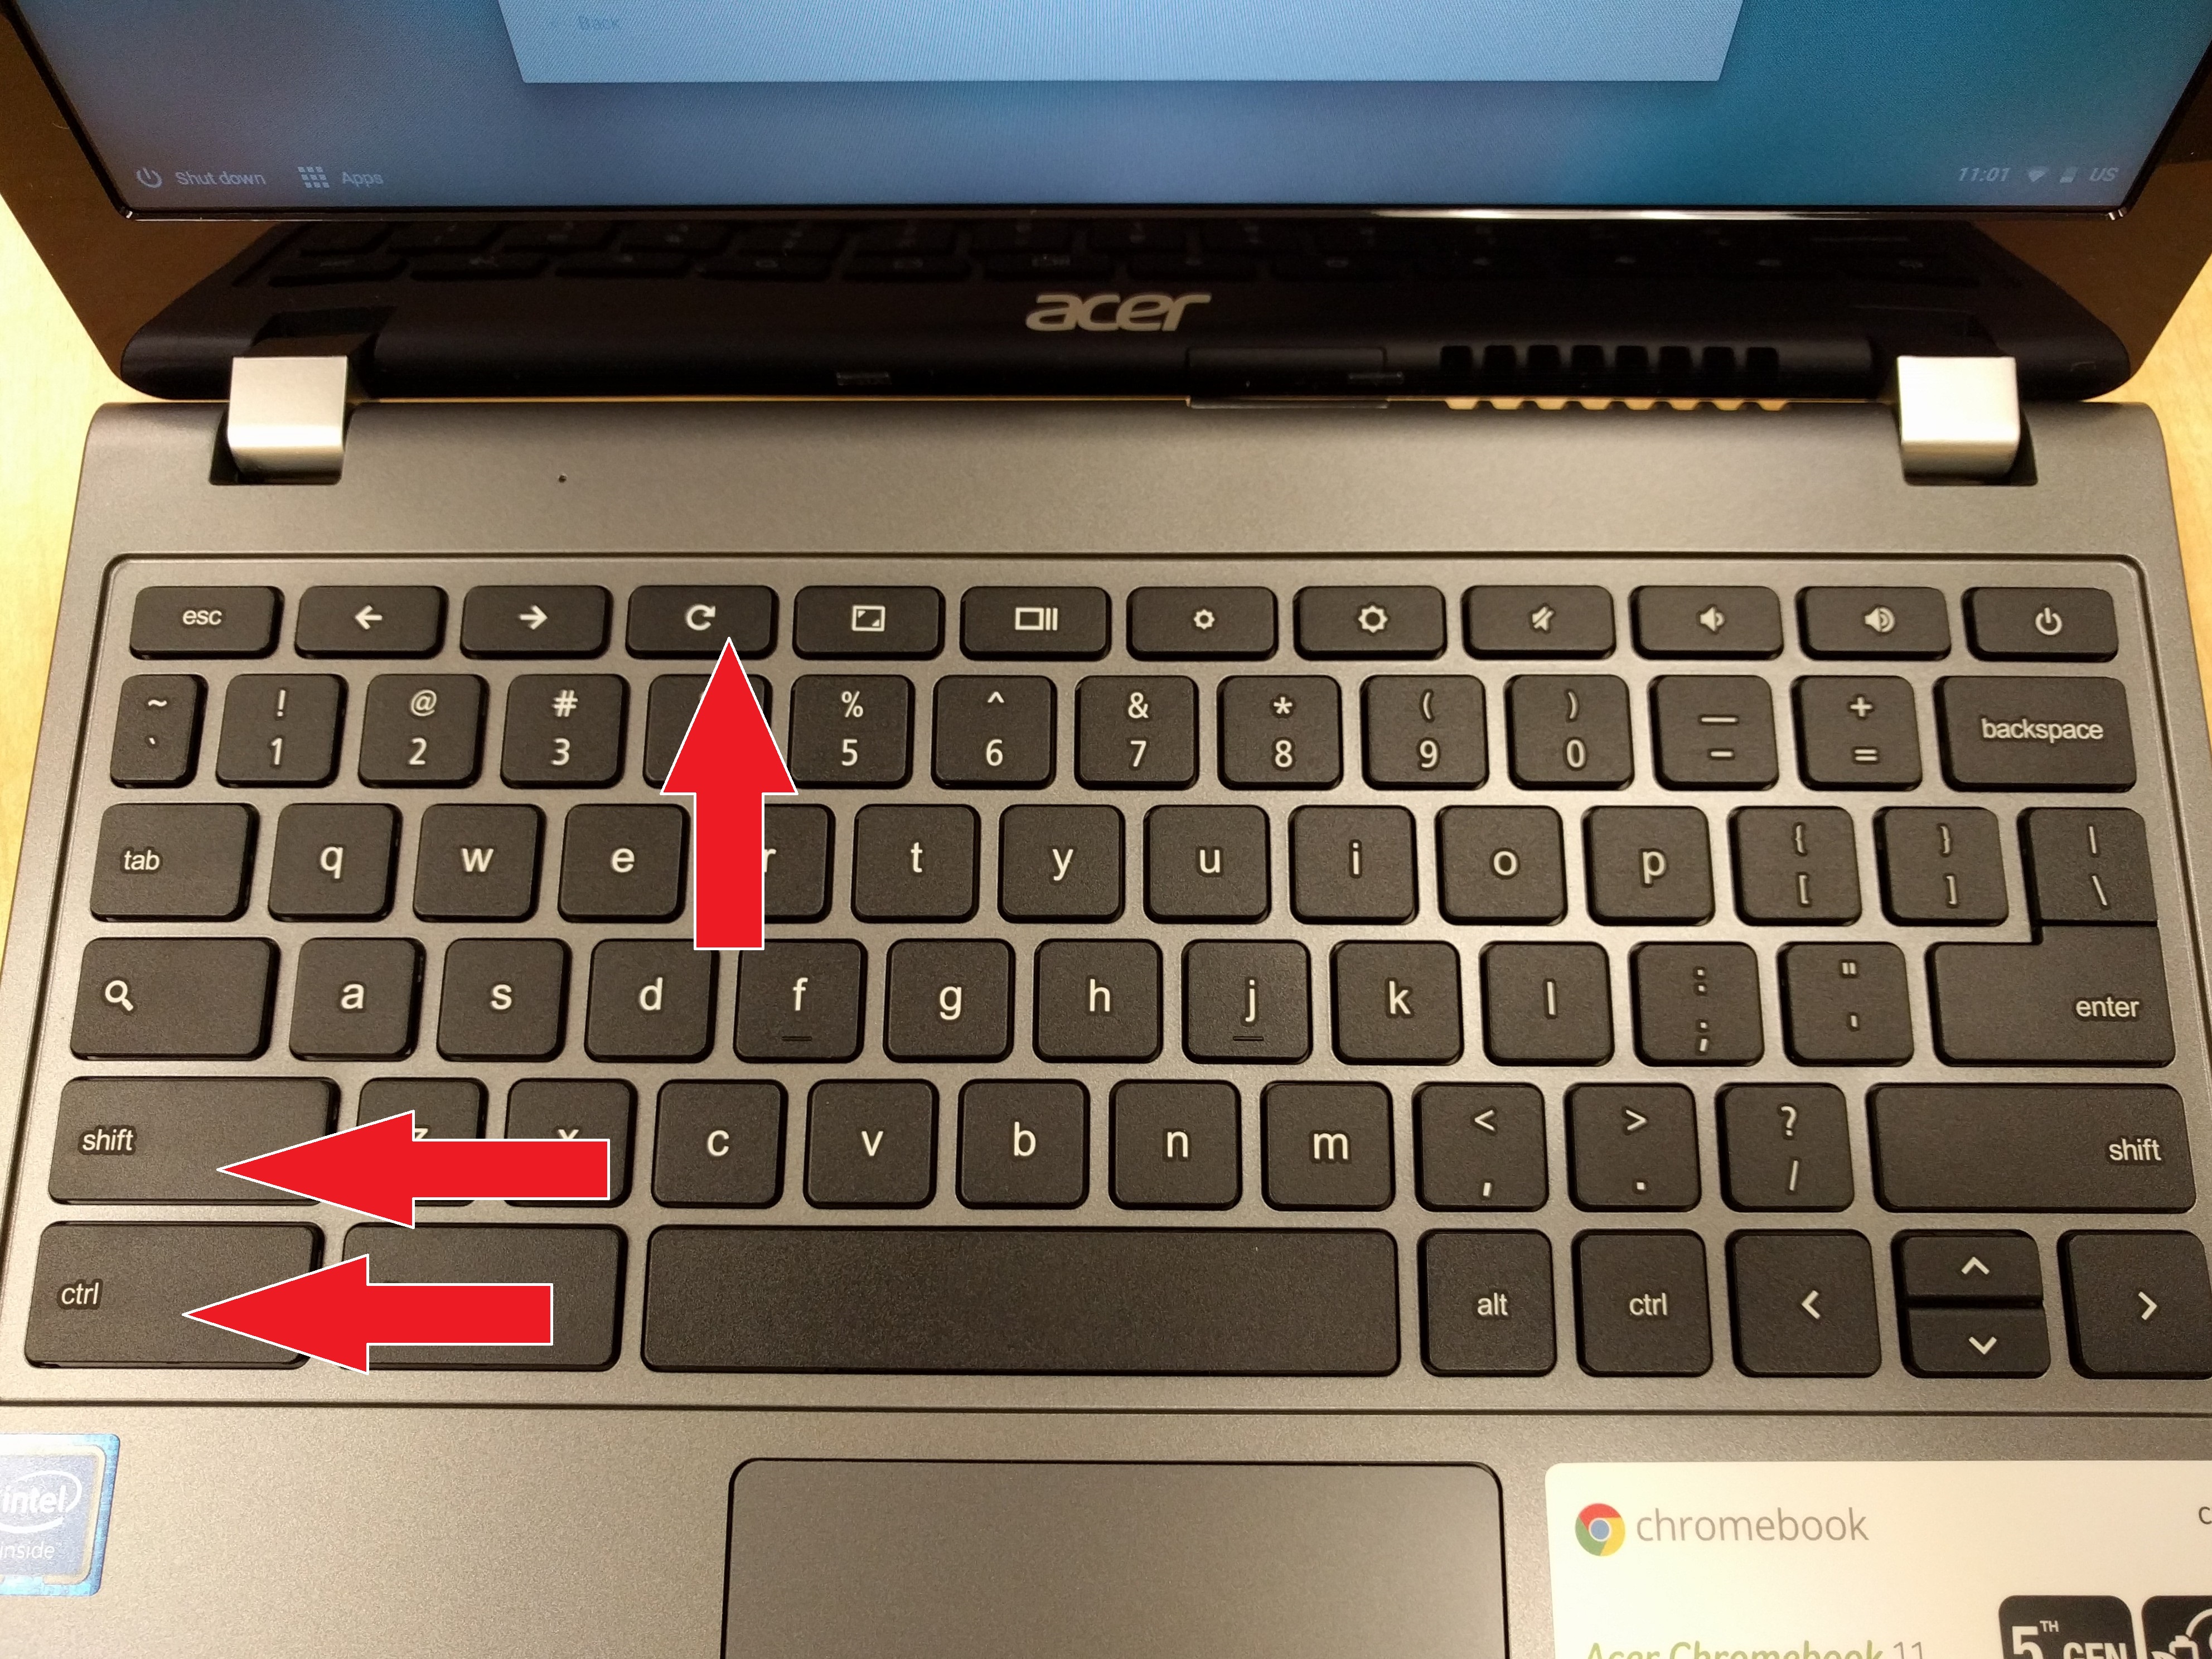 Change an Acer Chromebook screen from sideways display back to